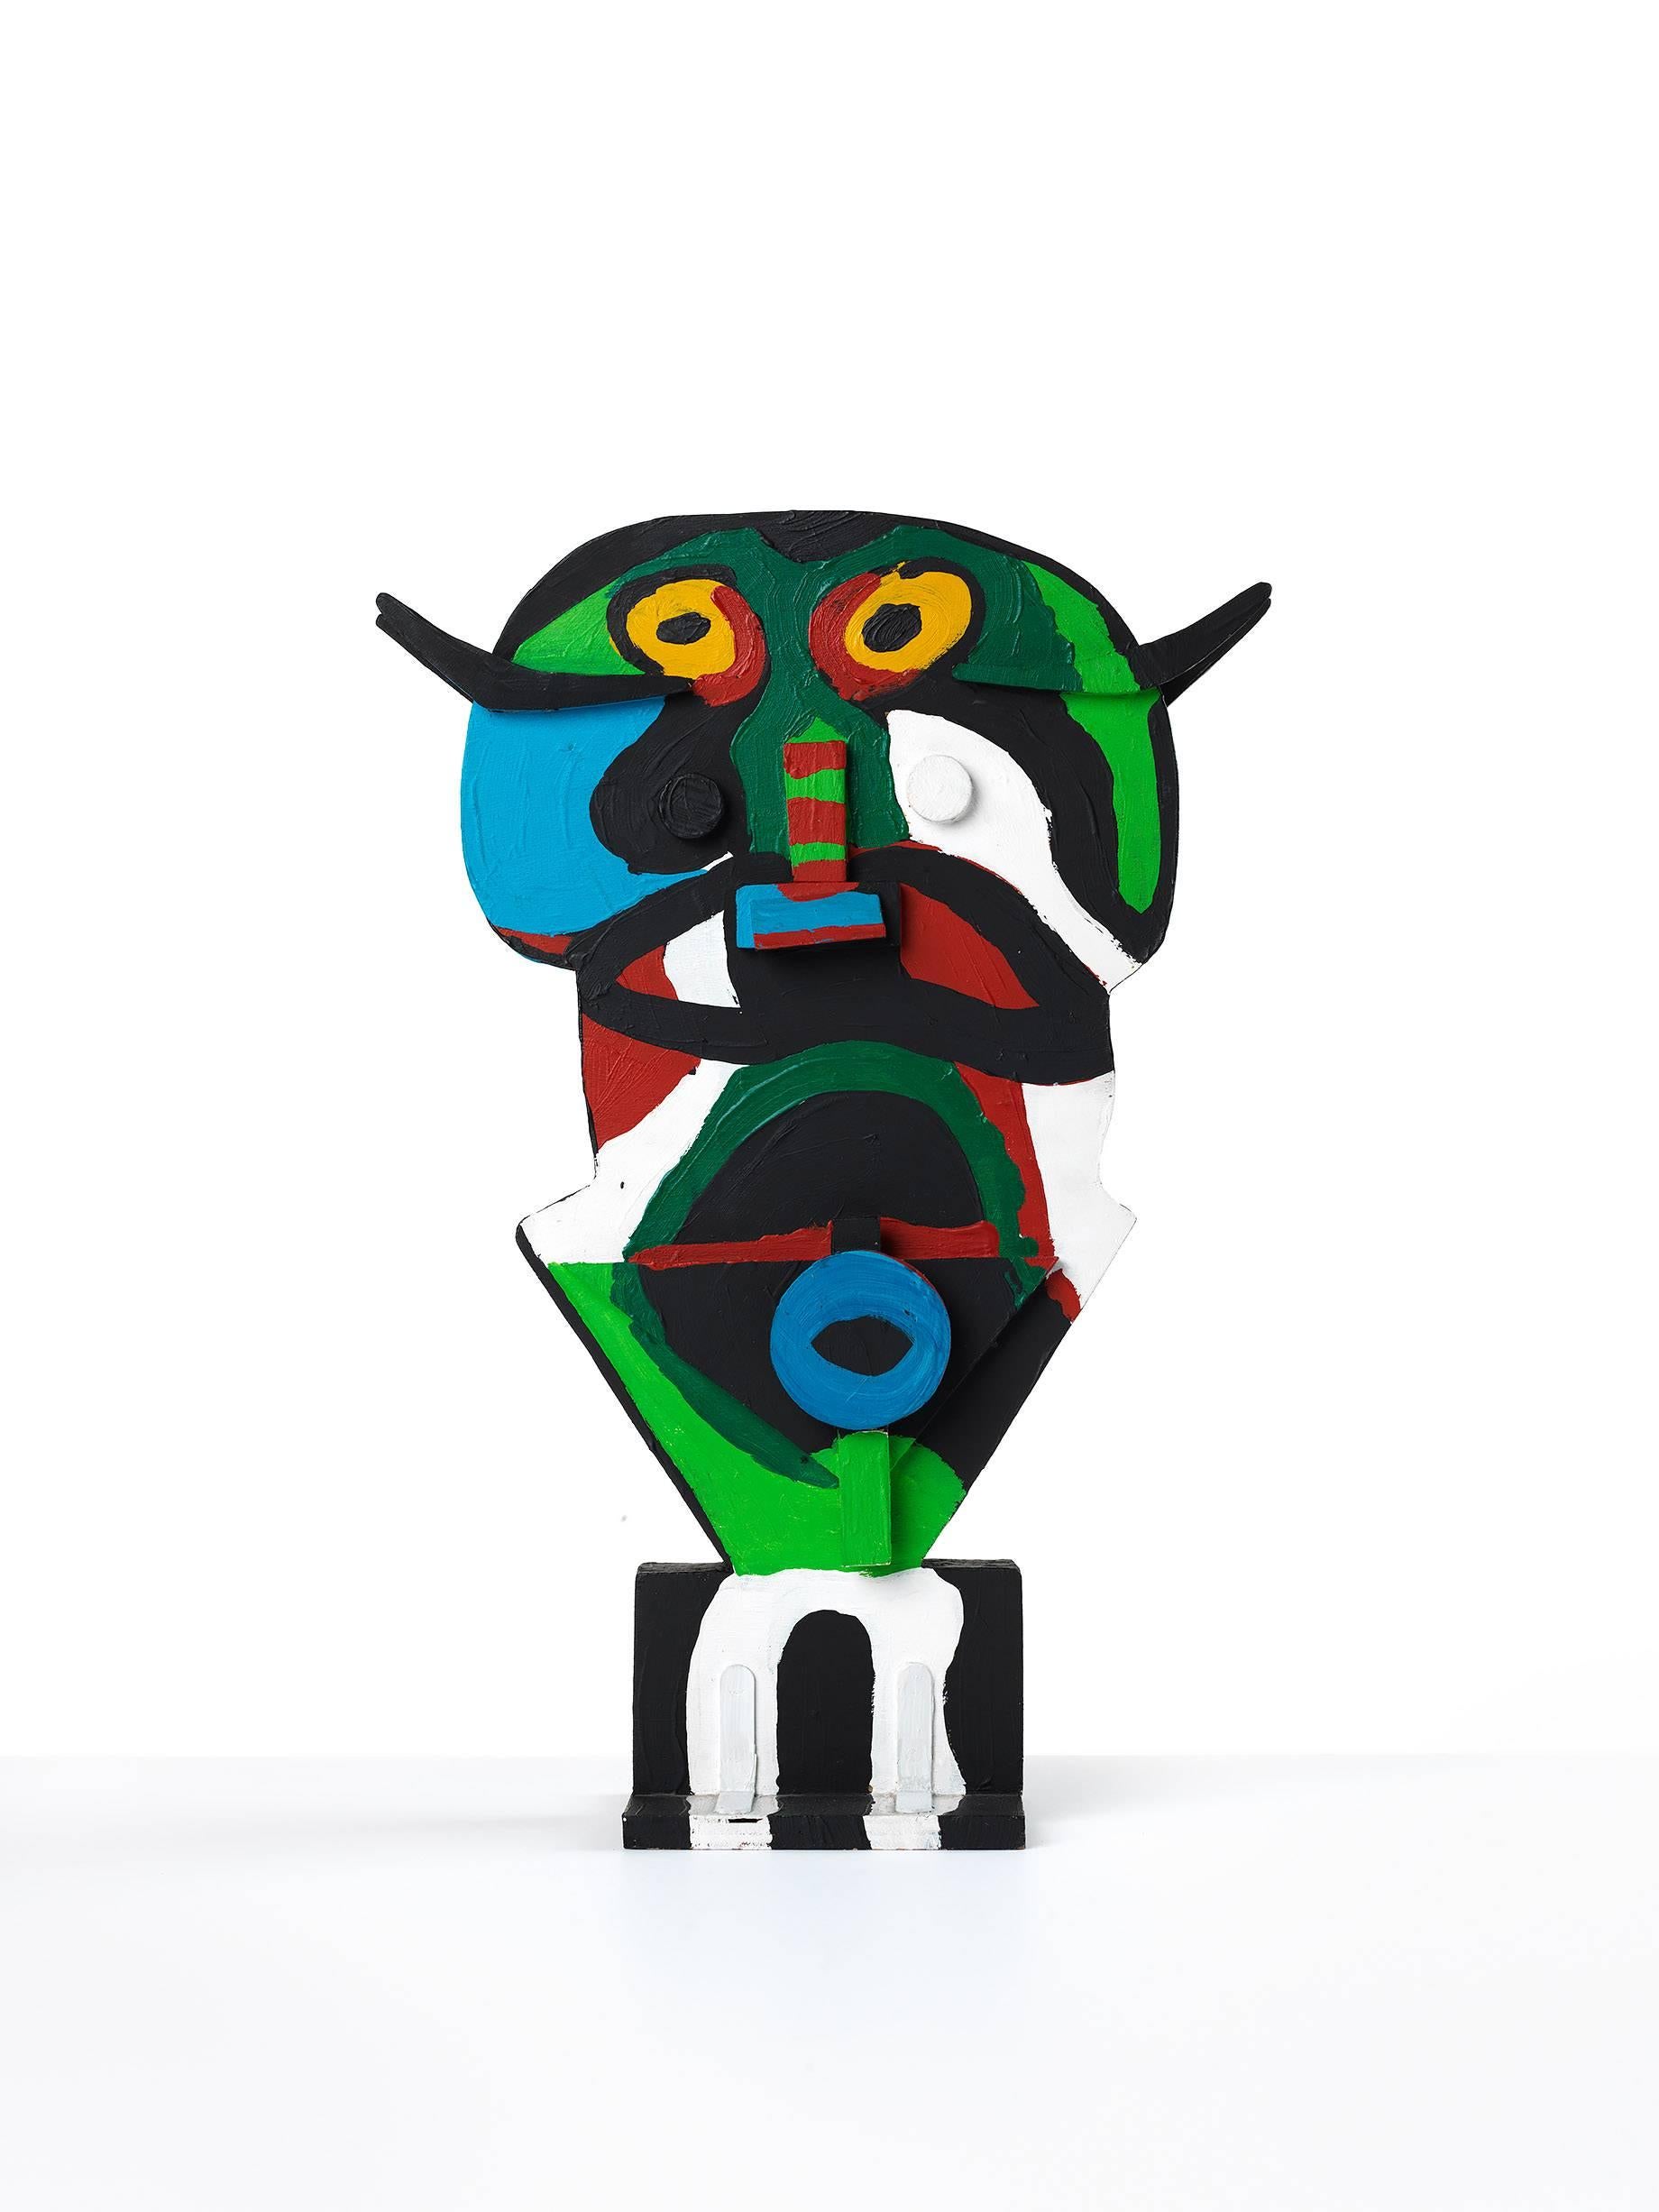 From the circus serie. - Sculpture by Karel Appel